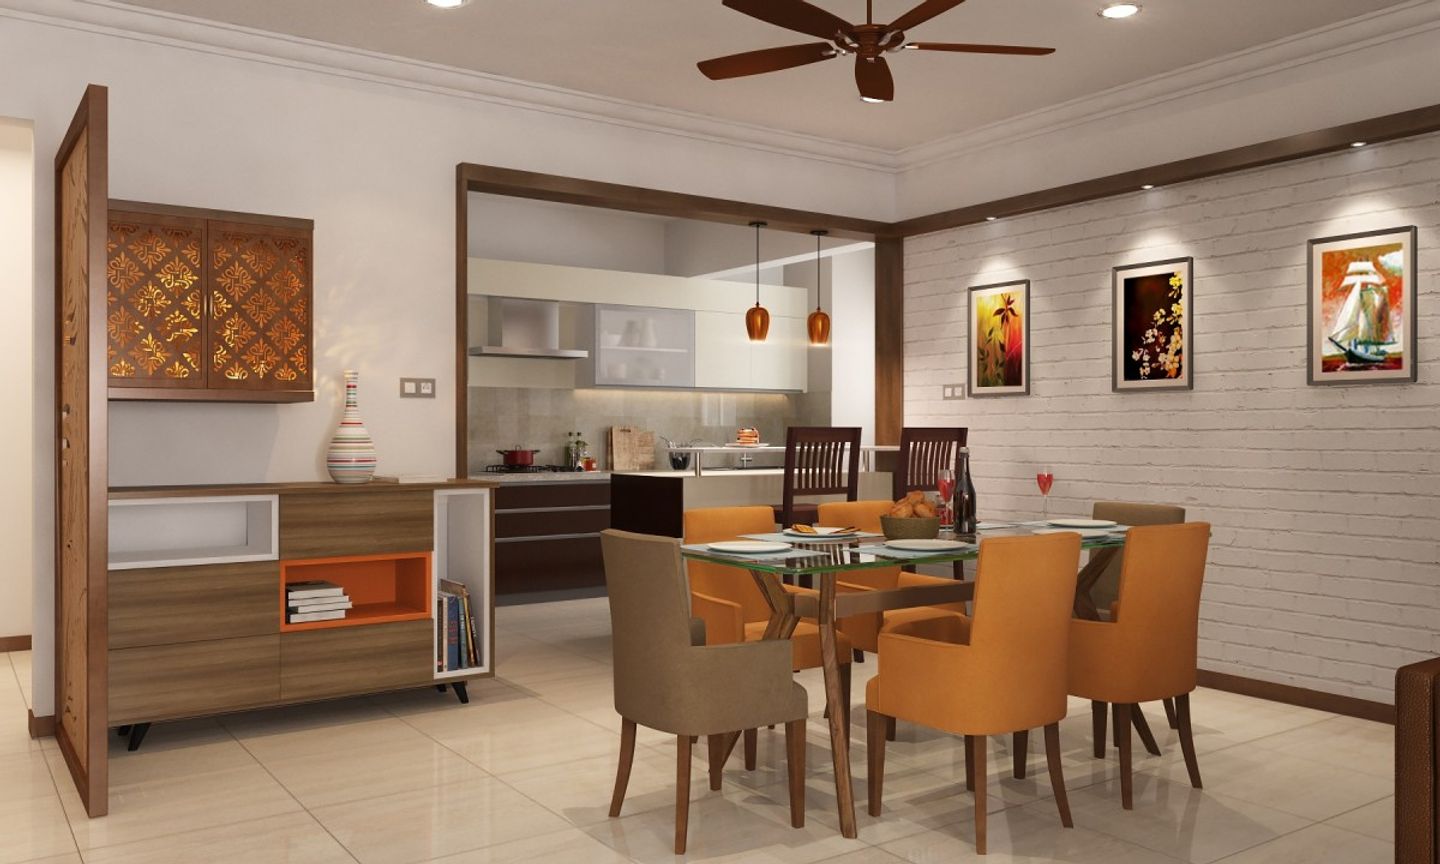 Contemporary 6-Seater Dining Room Design With Orange And Brown Chairs